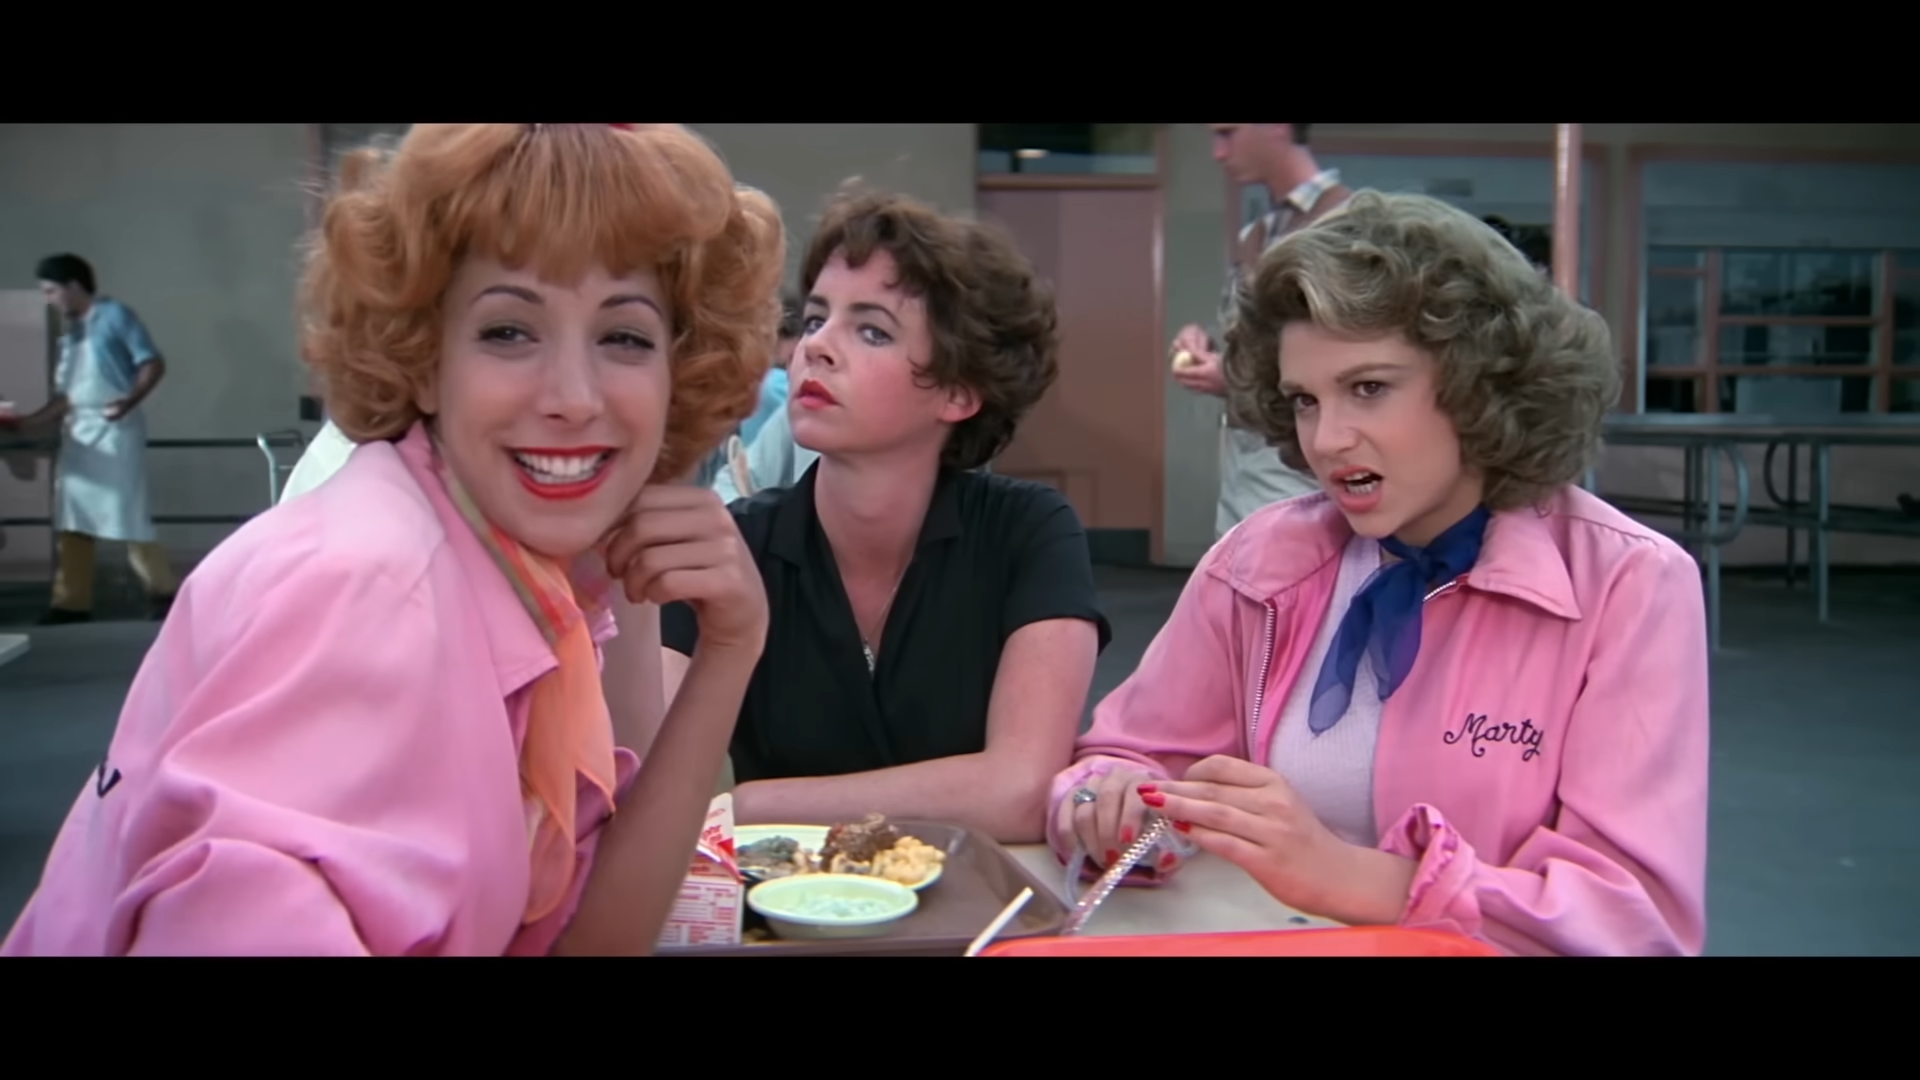 Paramount+ Announces 'Grease' Prequel 'Grease: Rise of the Pink